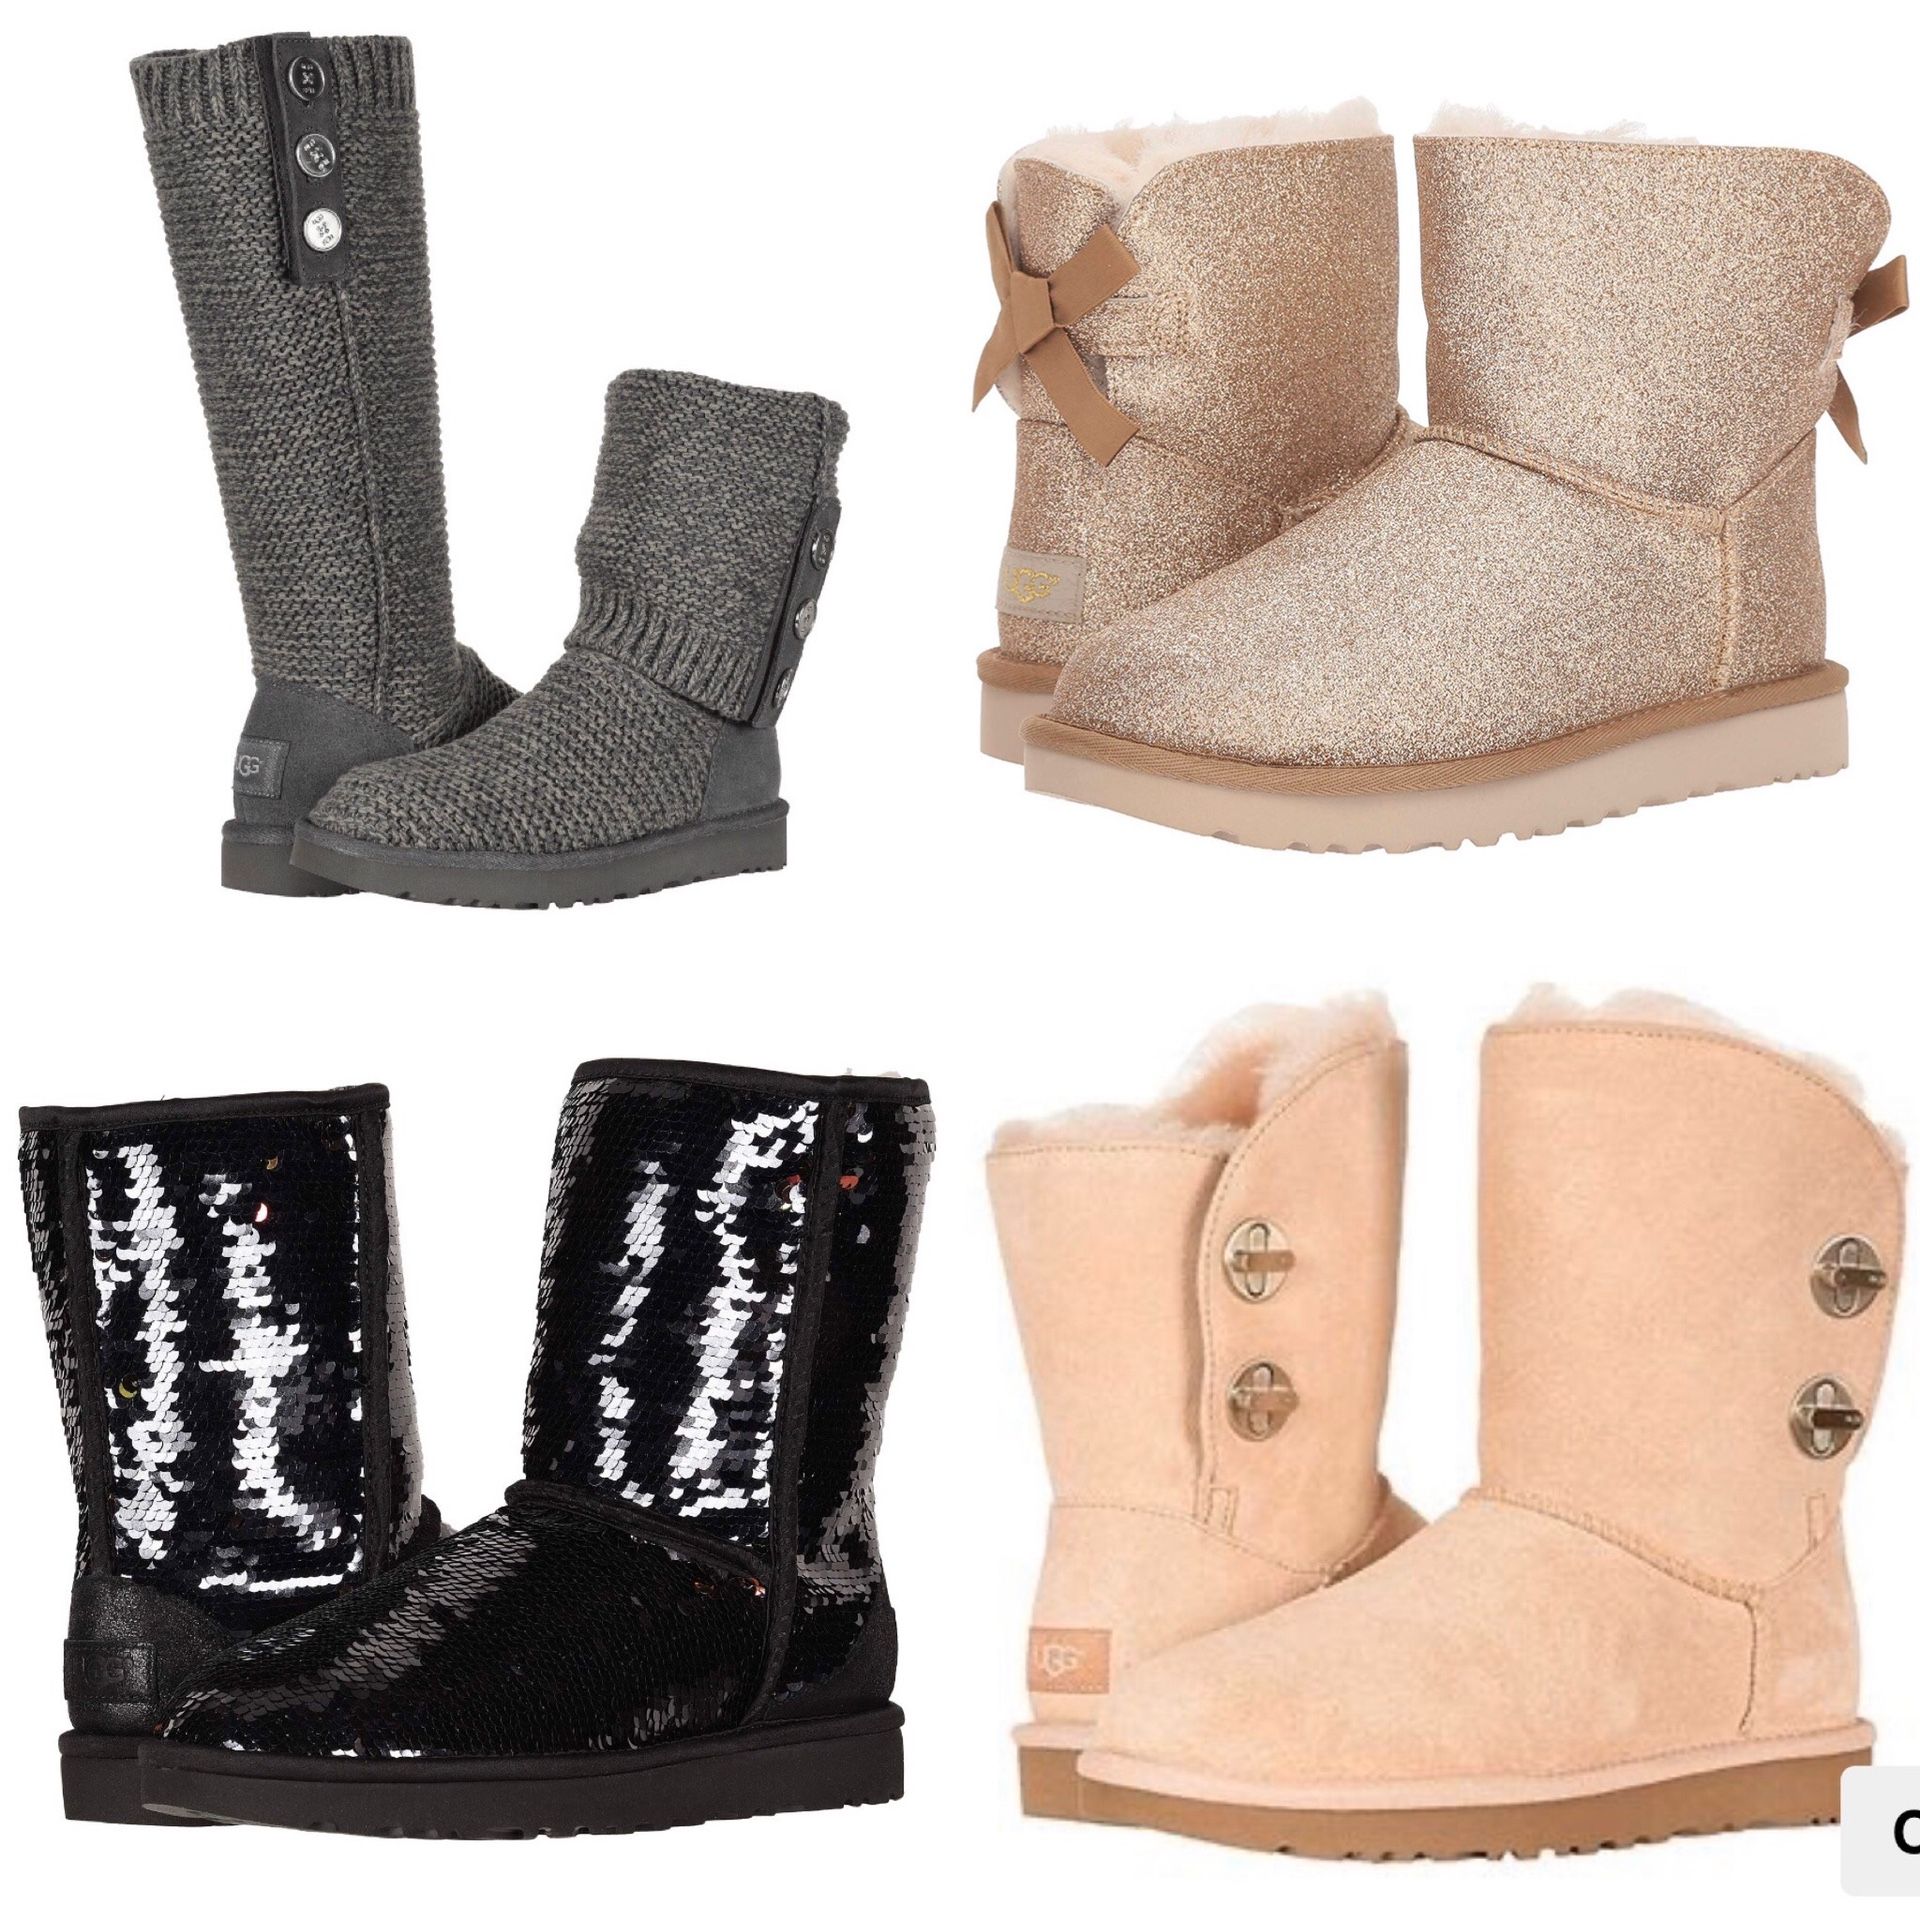 UGG Boots - All NEW! One of each style! Size 6 & 7